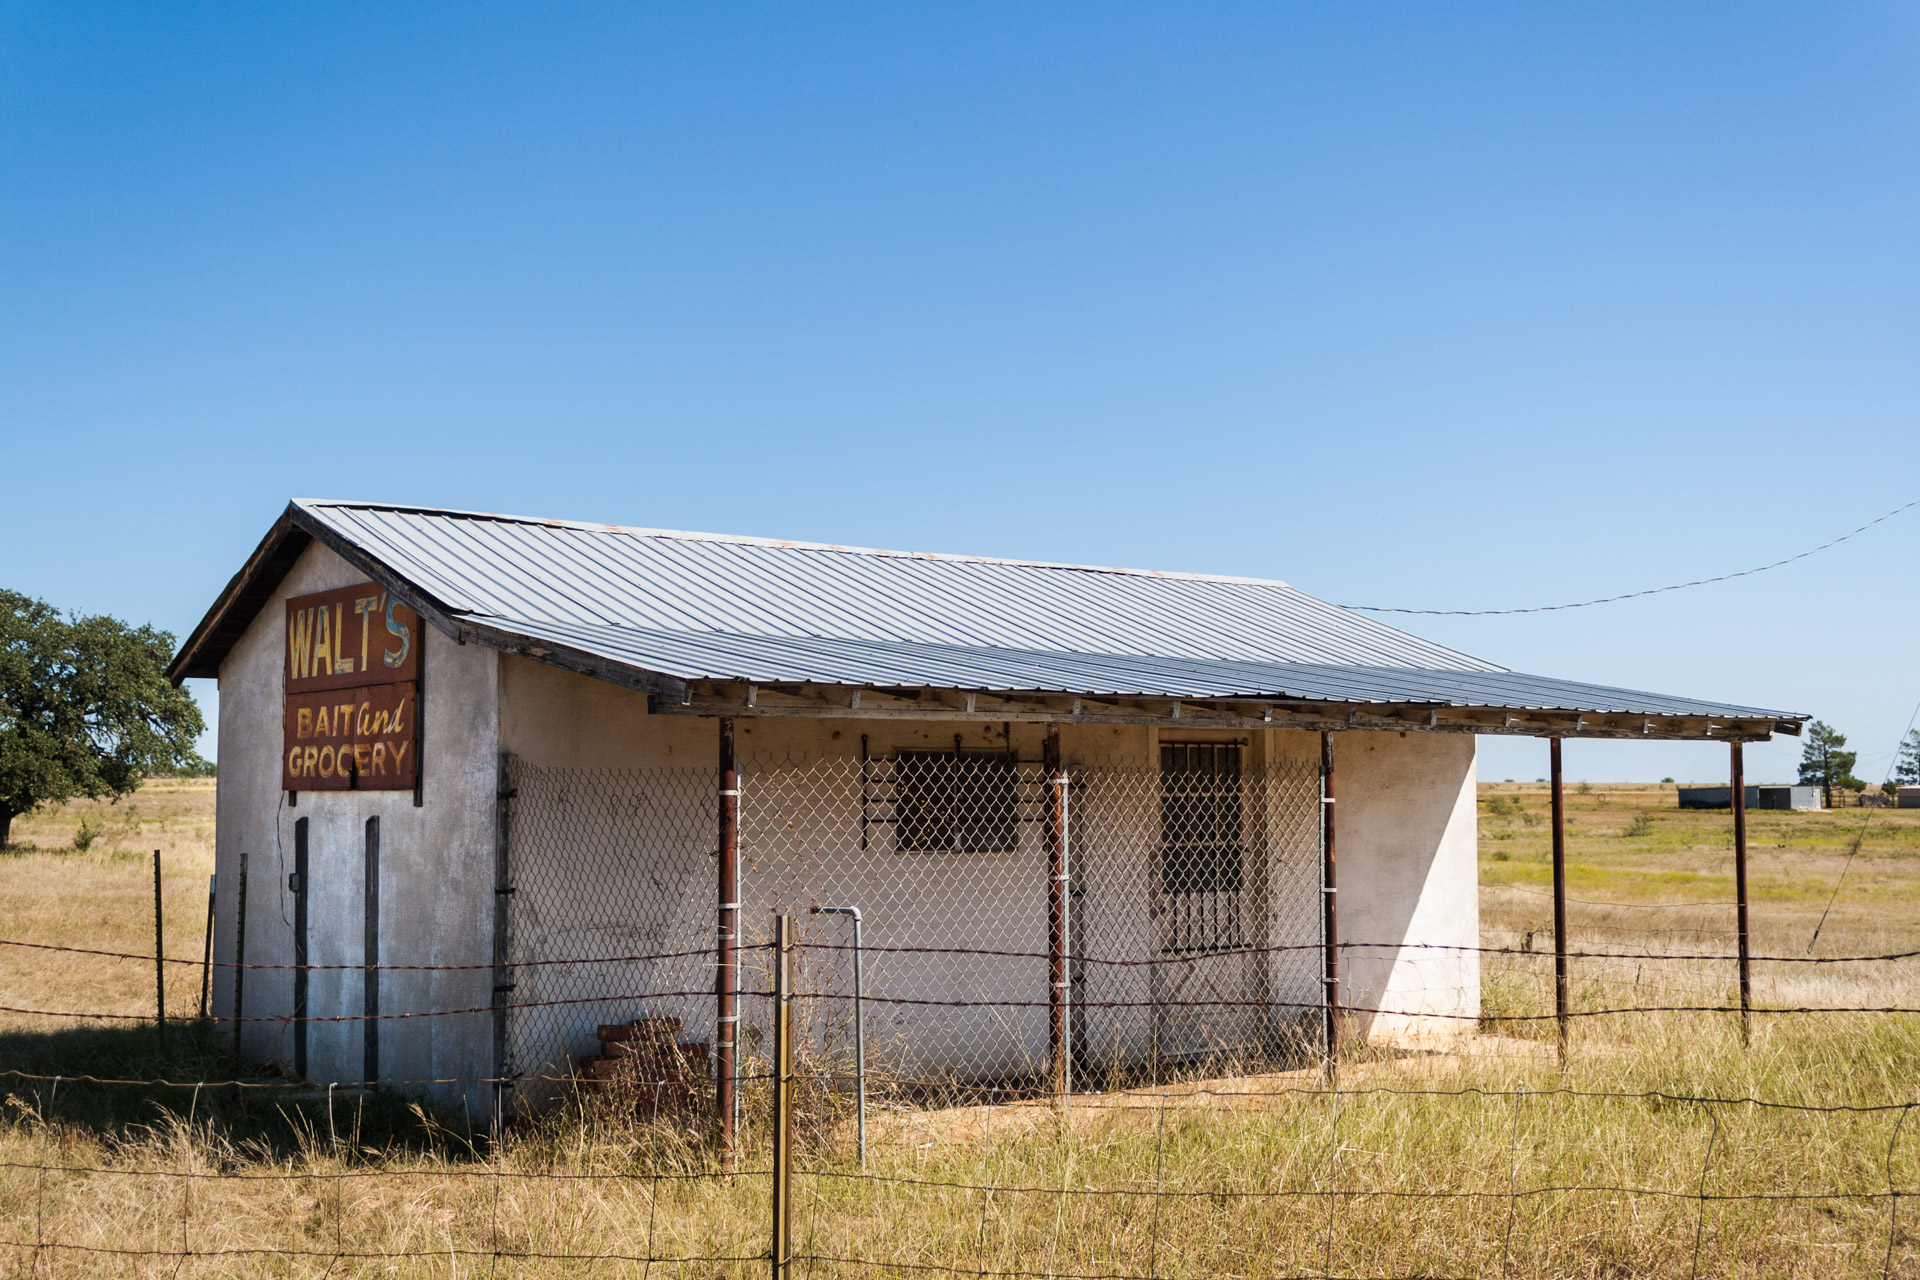 Coleman, Texas - Walt's Bait and Grocery